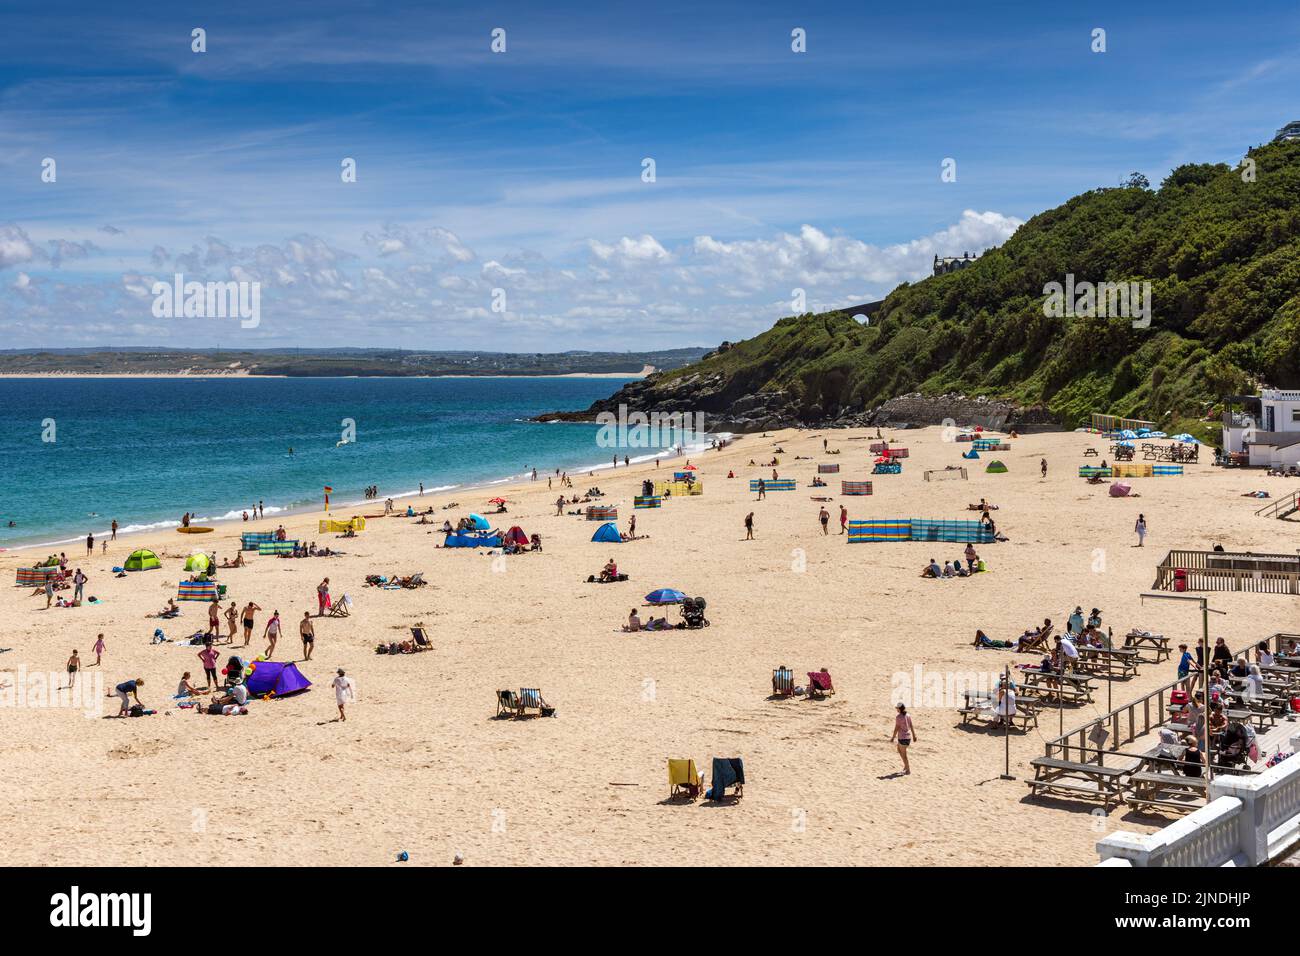 People enjoying a sunny summer's day at Porthminster beach in St Ives, Cornwall, England. Stock Photo